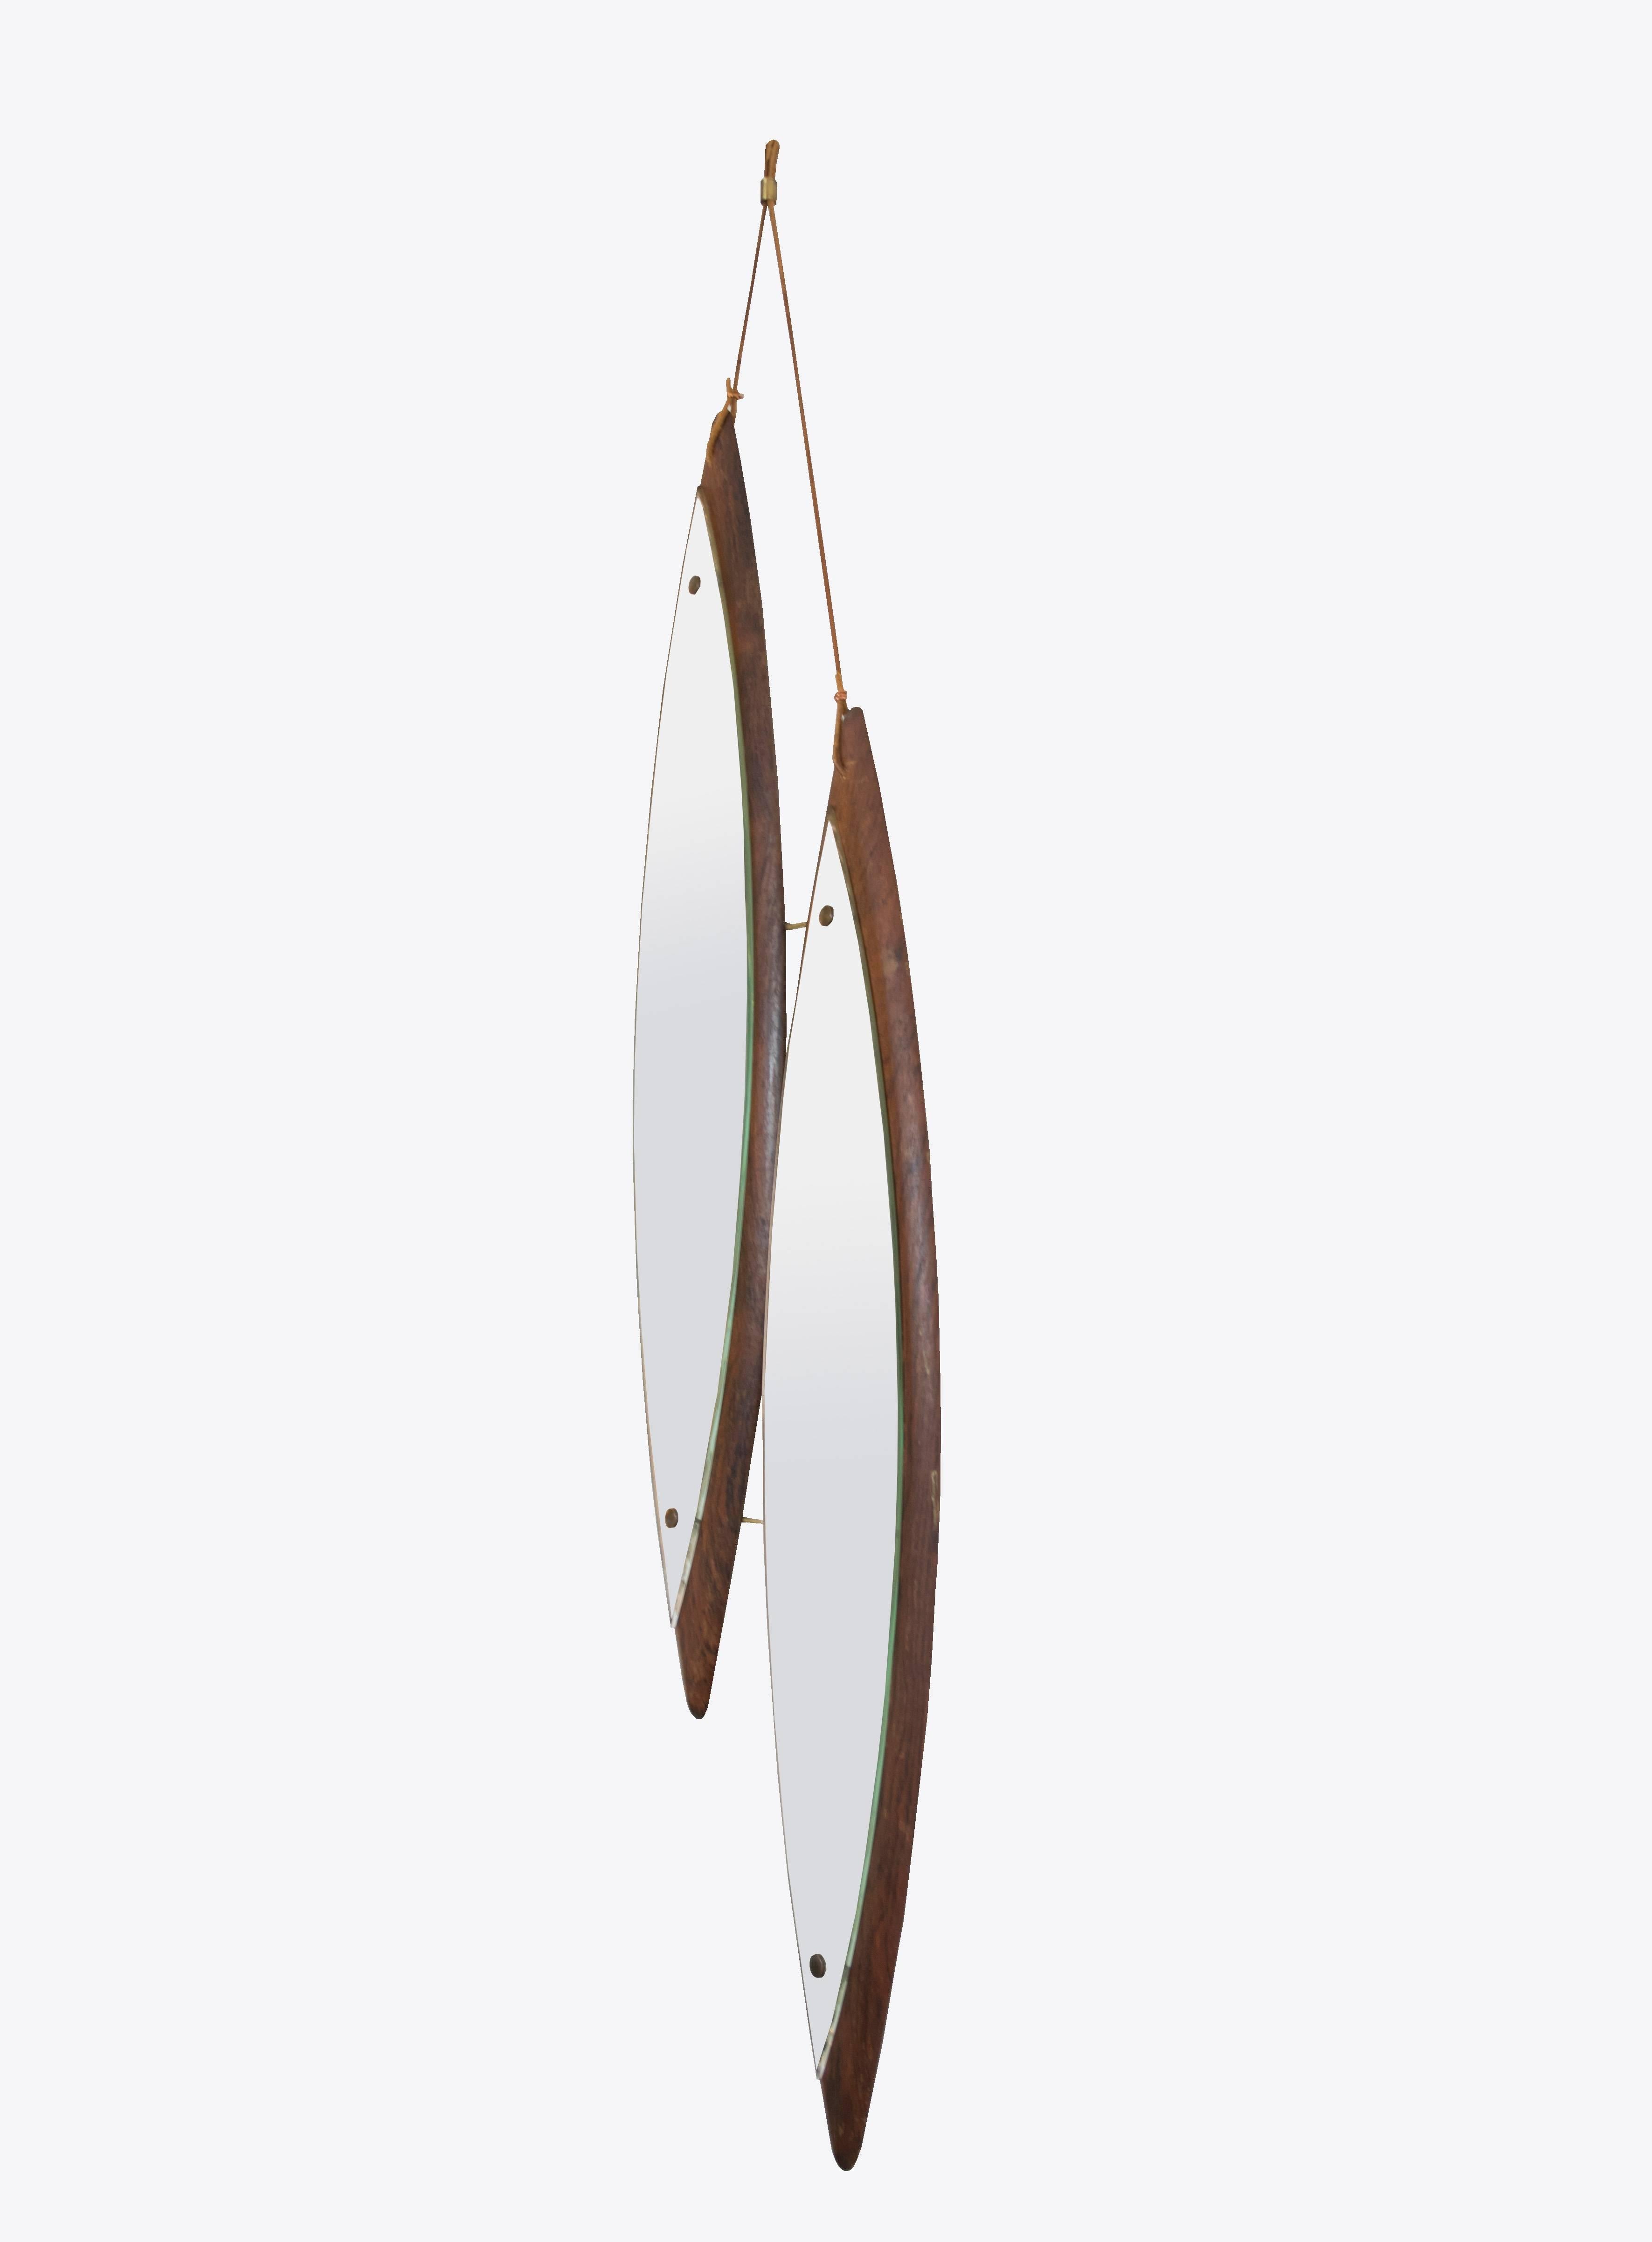 This is a highly unusual design, asymmetrical diamond shaped rosewood mirrors fastened together by brass rods and hanging by double leather straps with a brass clasp.